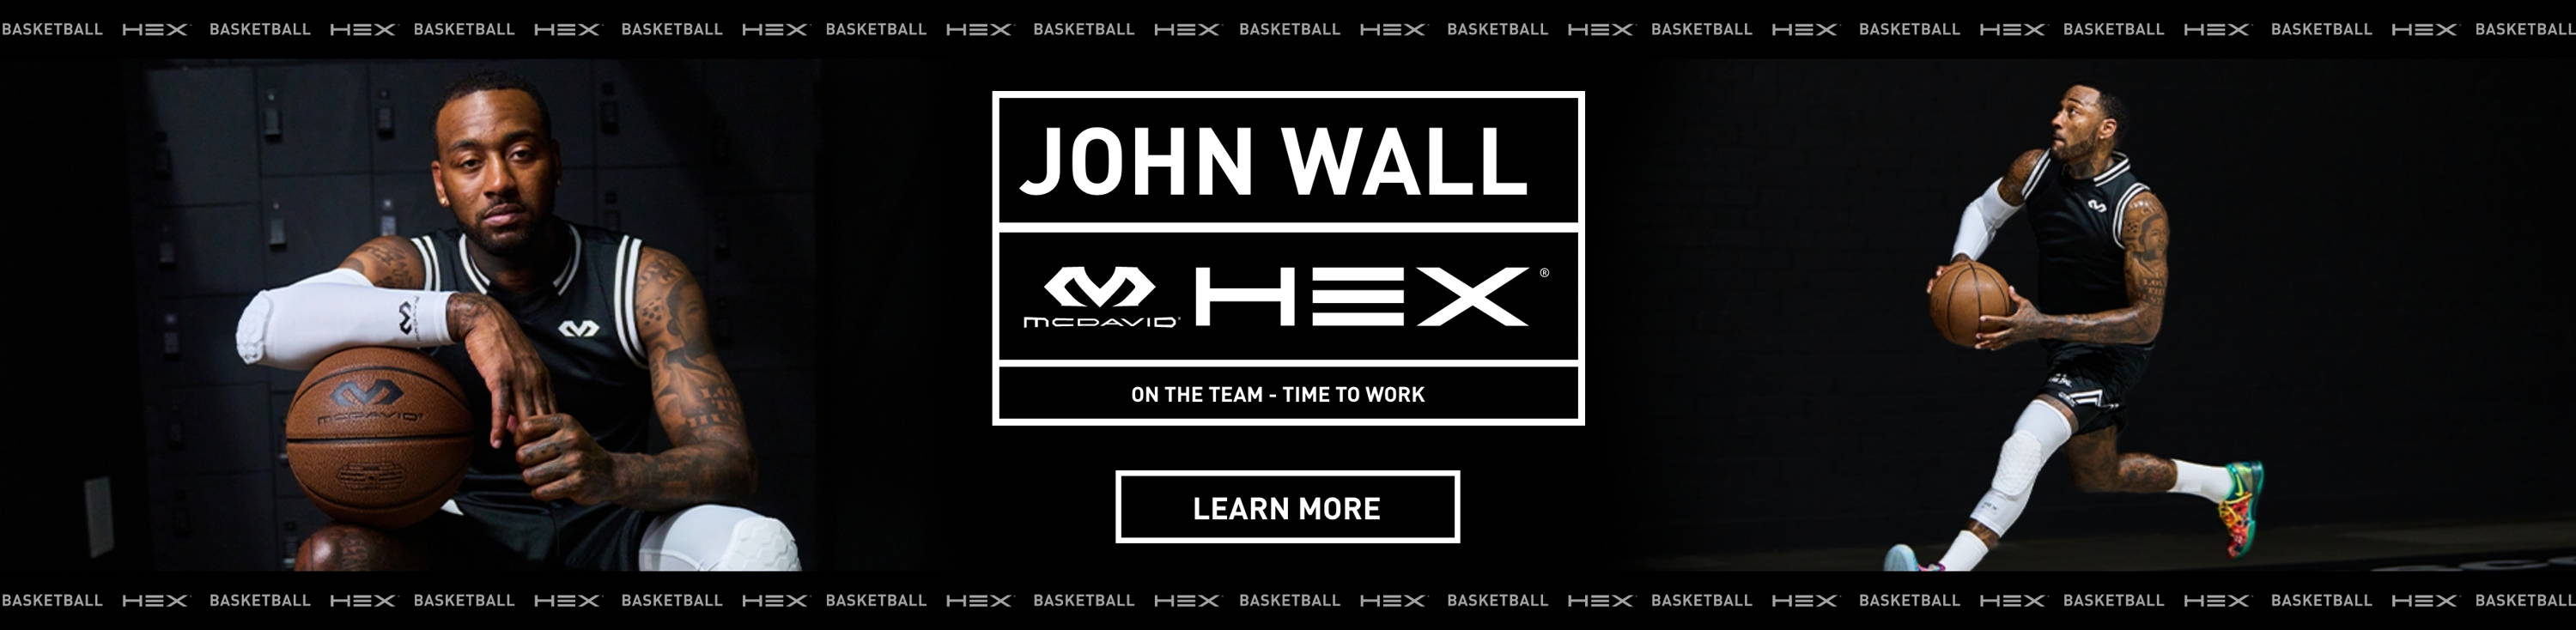 John Wall - McDavid HEX - On The Team - Time To Work -  Learn More